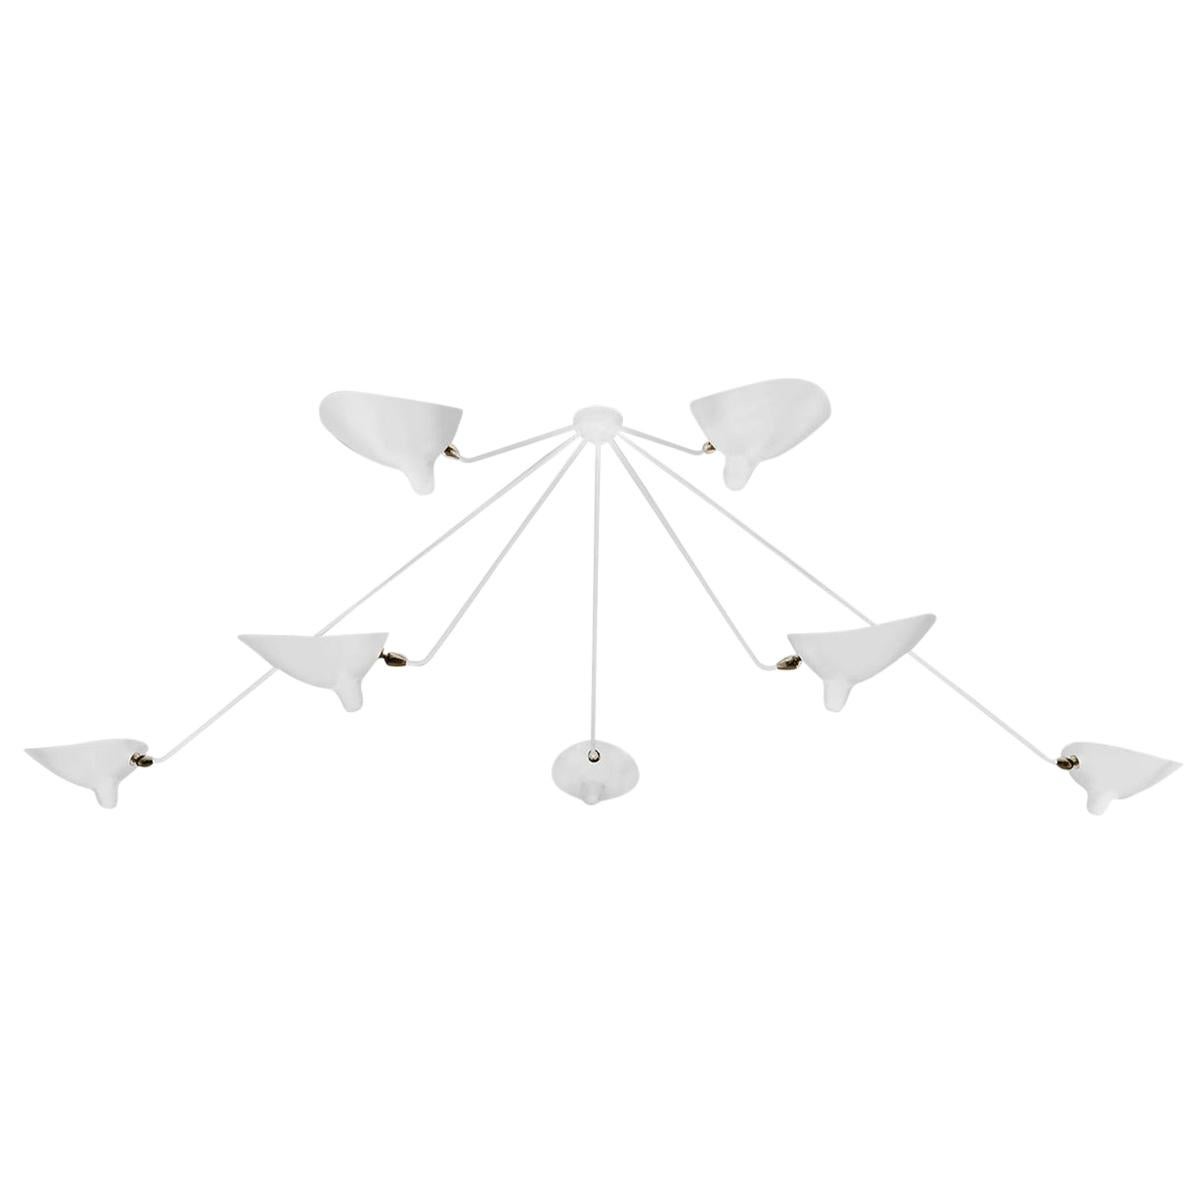 Serge Mouille Mid-Century Modern White Seven Fixed Arms Spider Ceiling Lamp For Sale